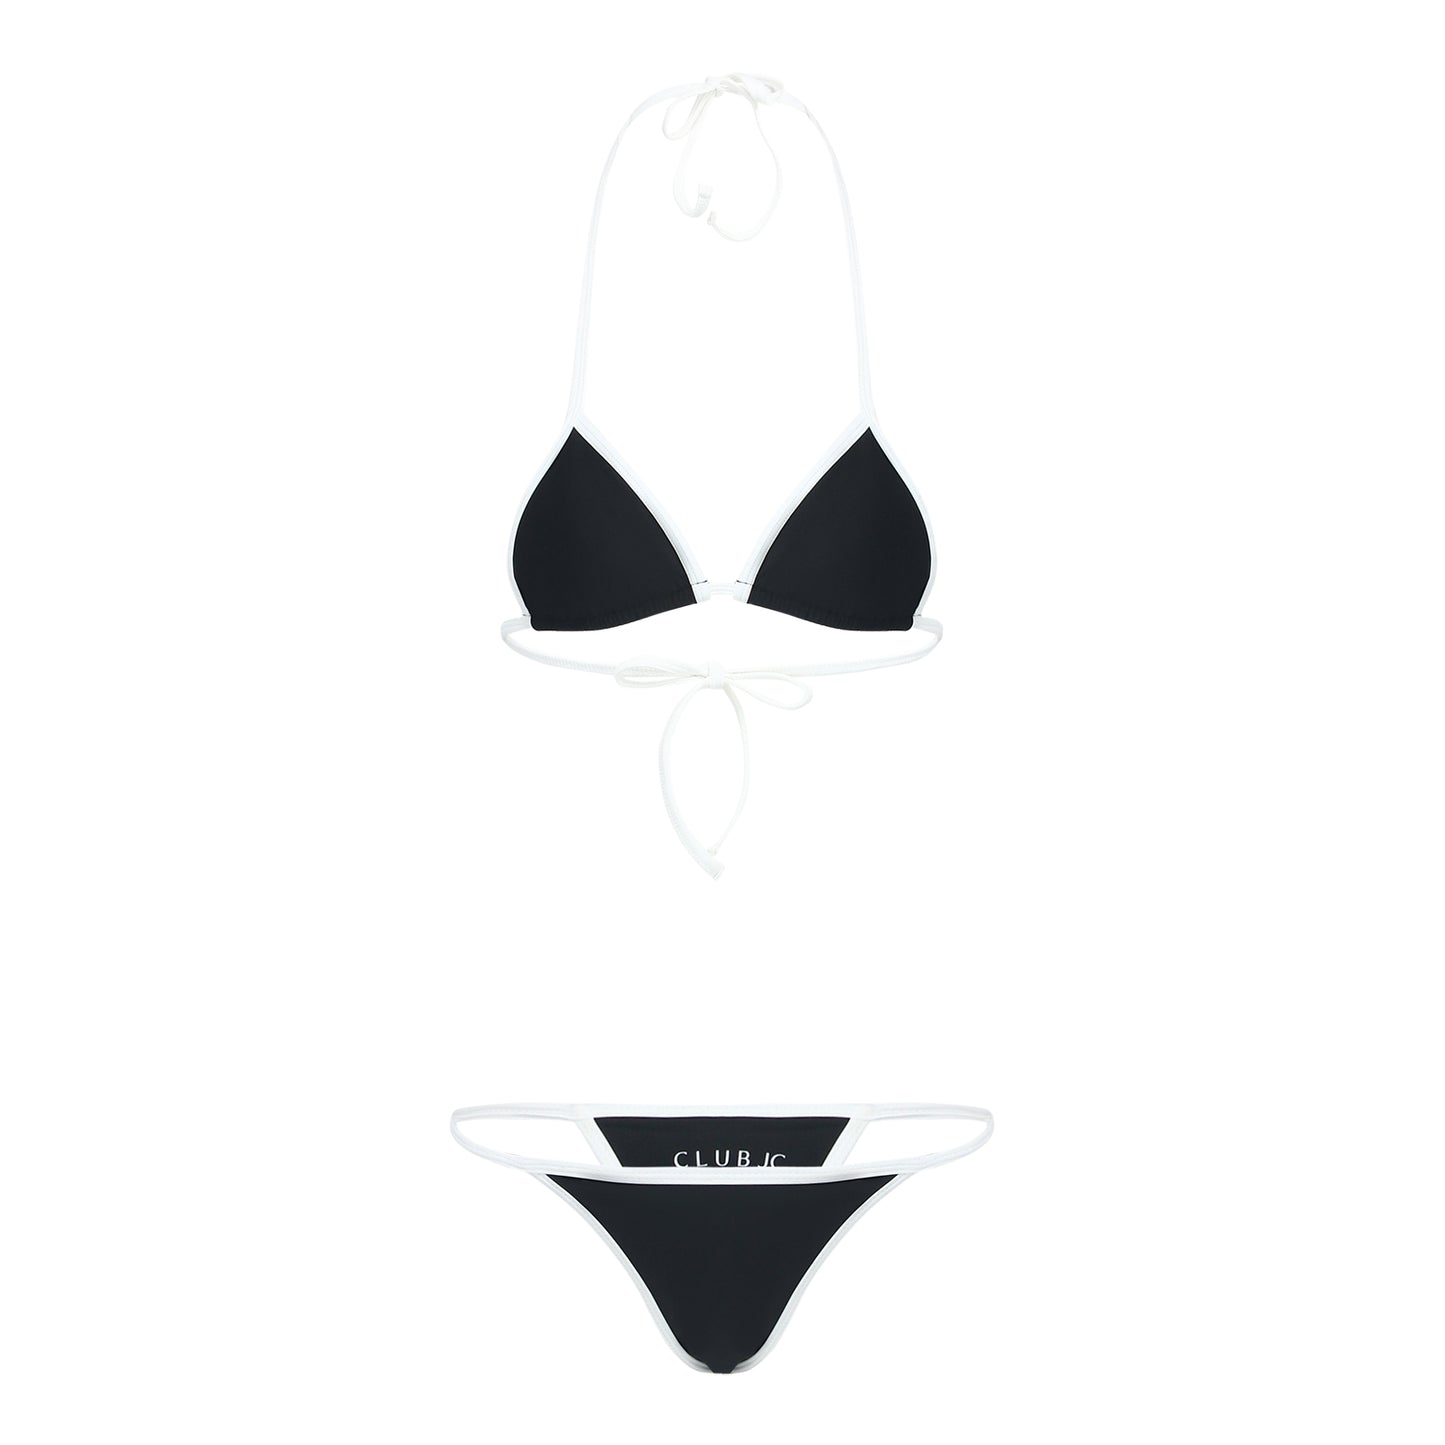 The Vida is a classic bikini set, with a string tie bikini top and cheeky bottoms. Made with sustainable fabric. 